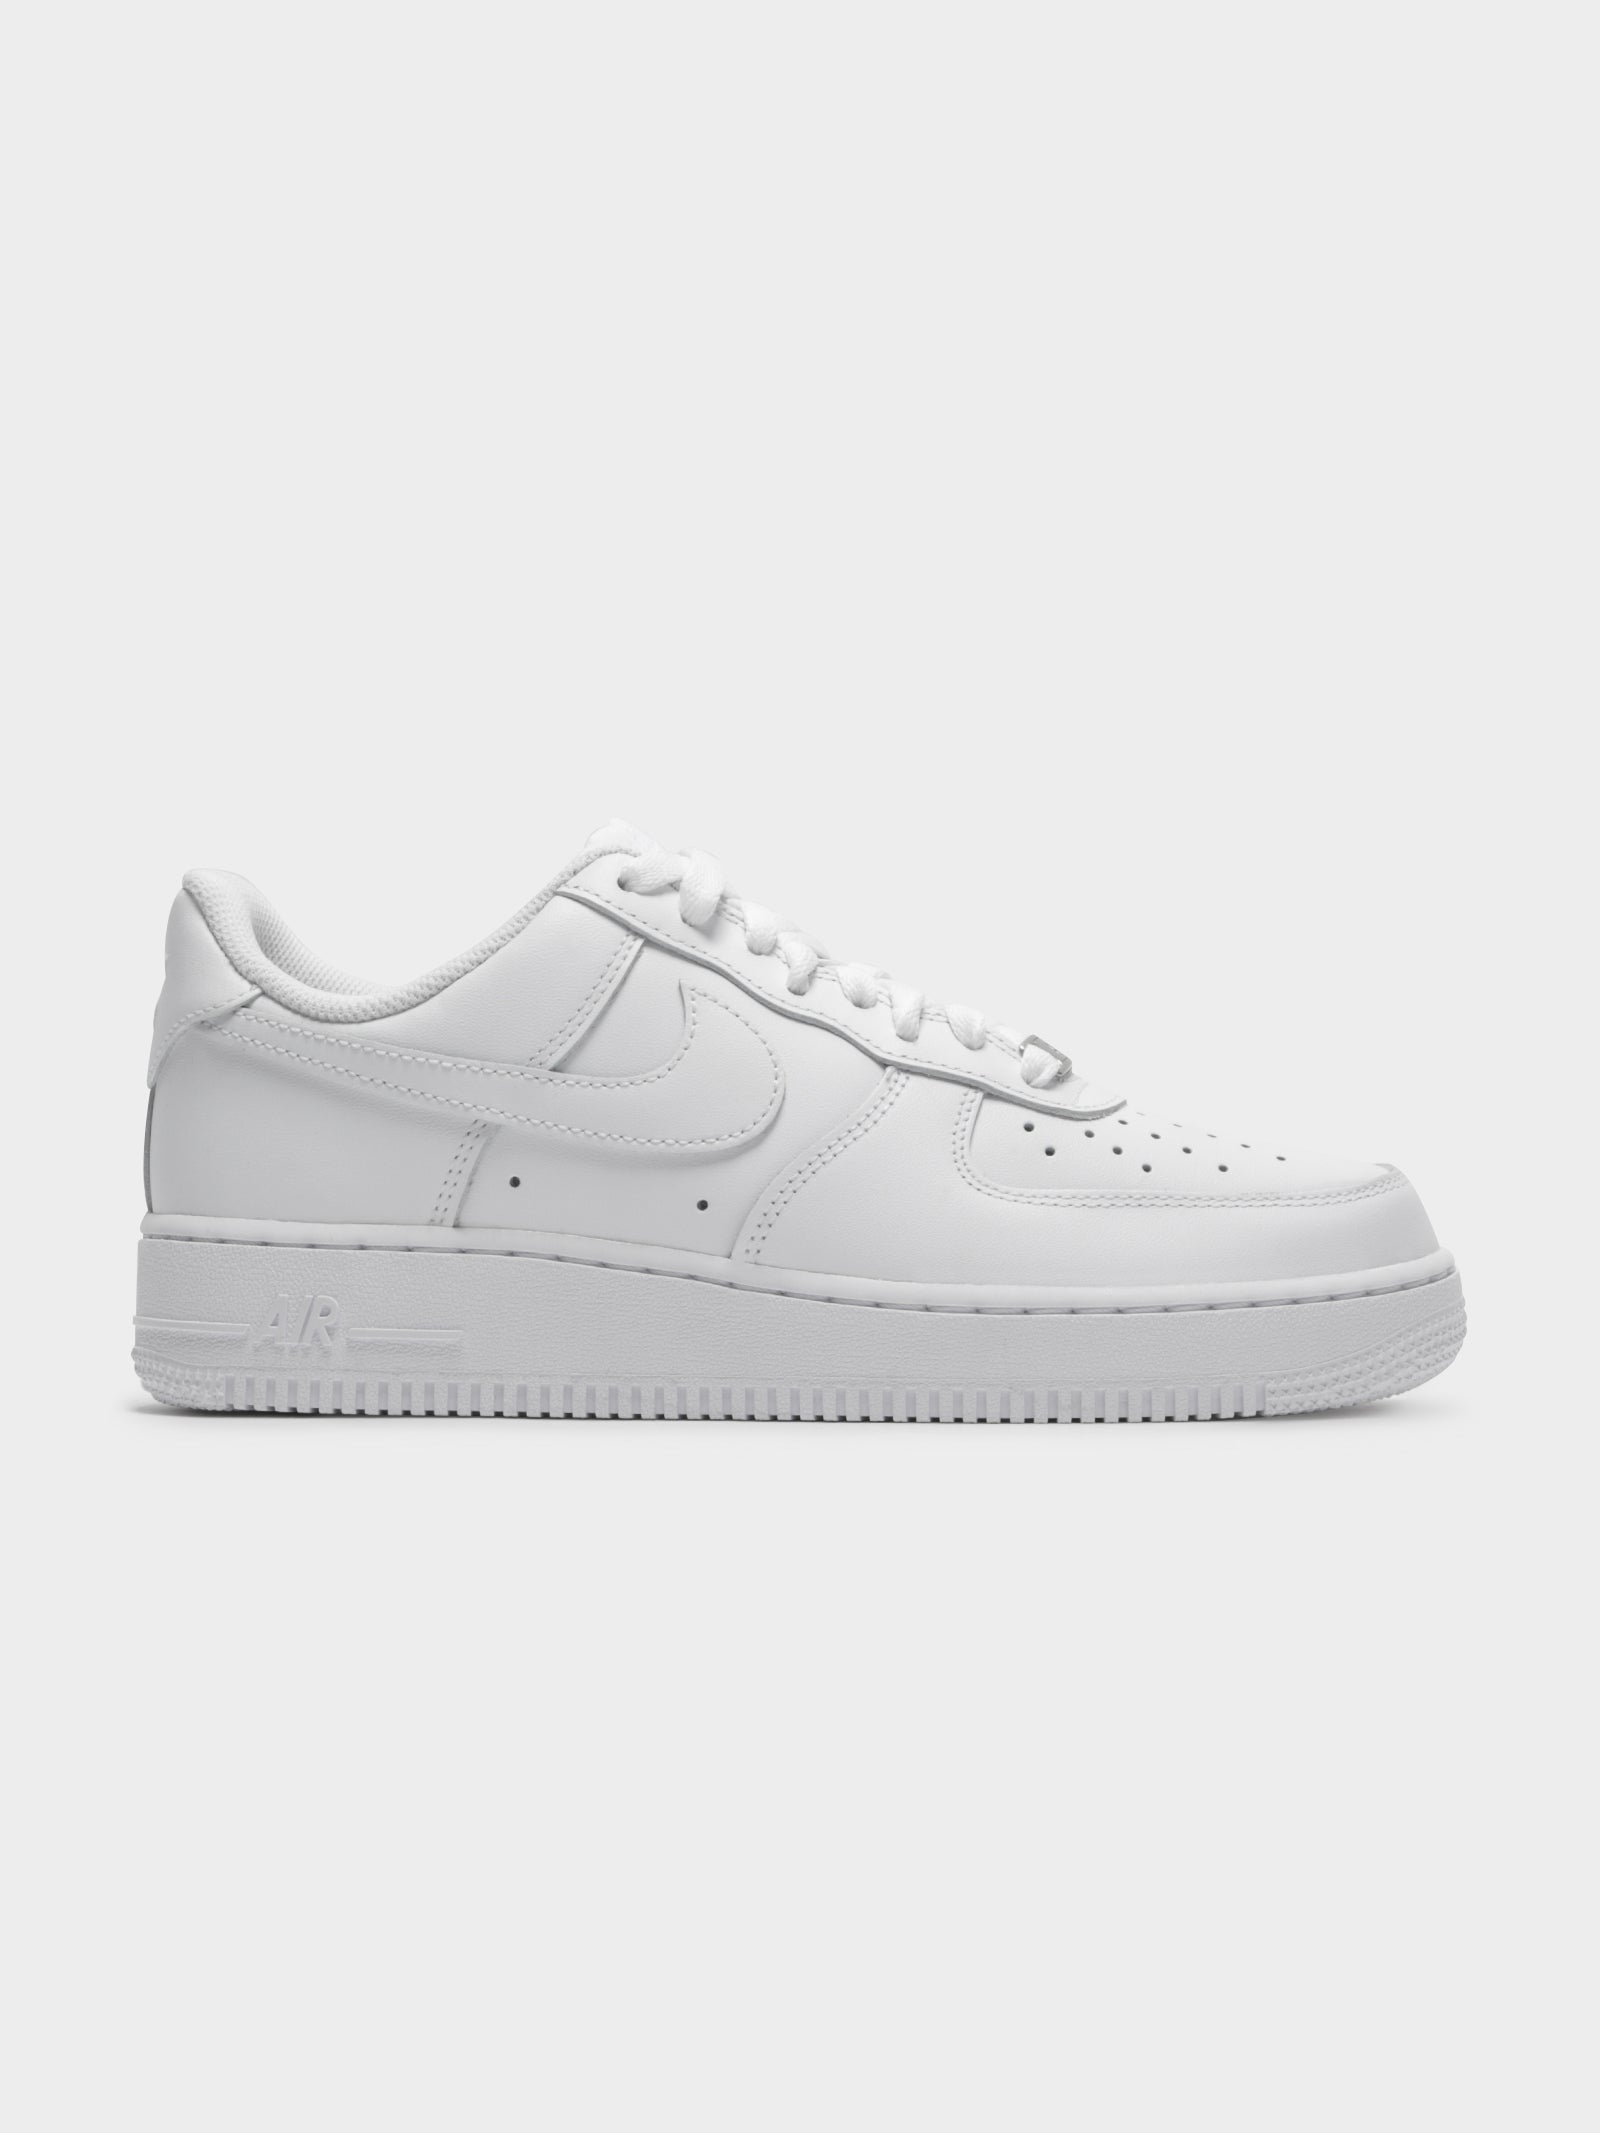 Womens Air Force 1 '07 in White - Glue Store